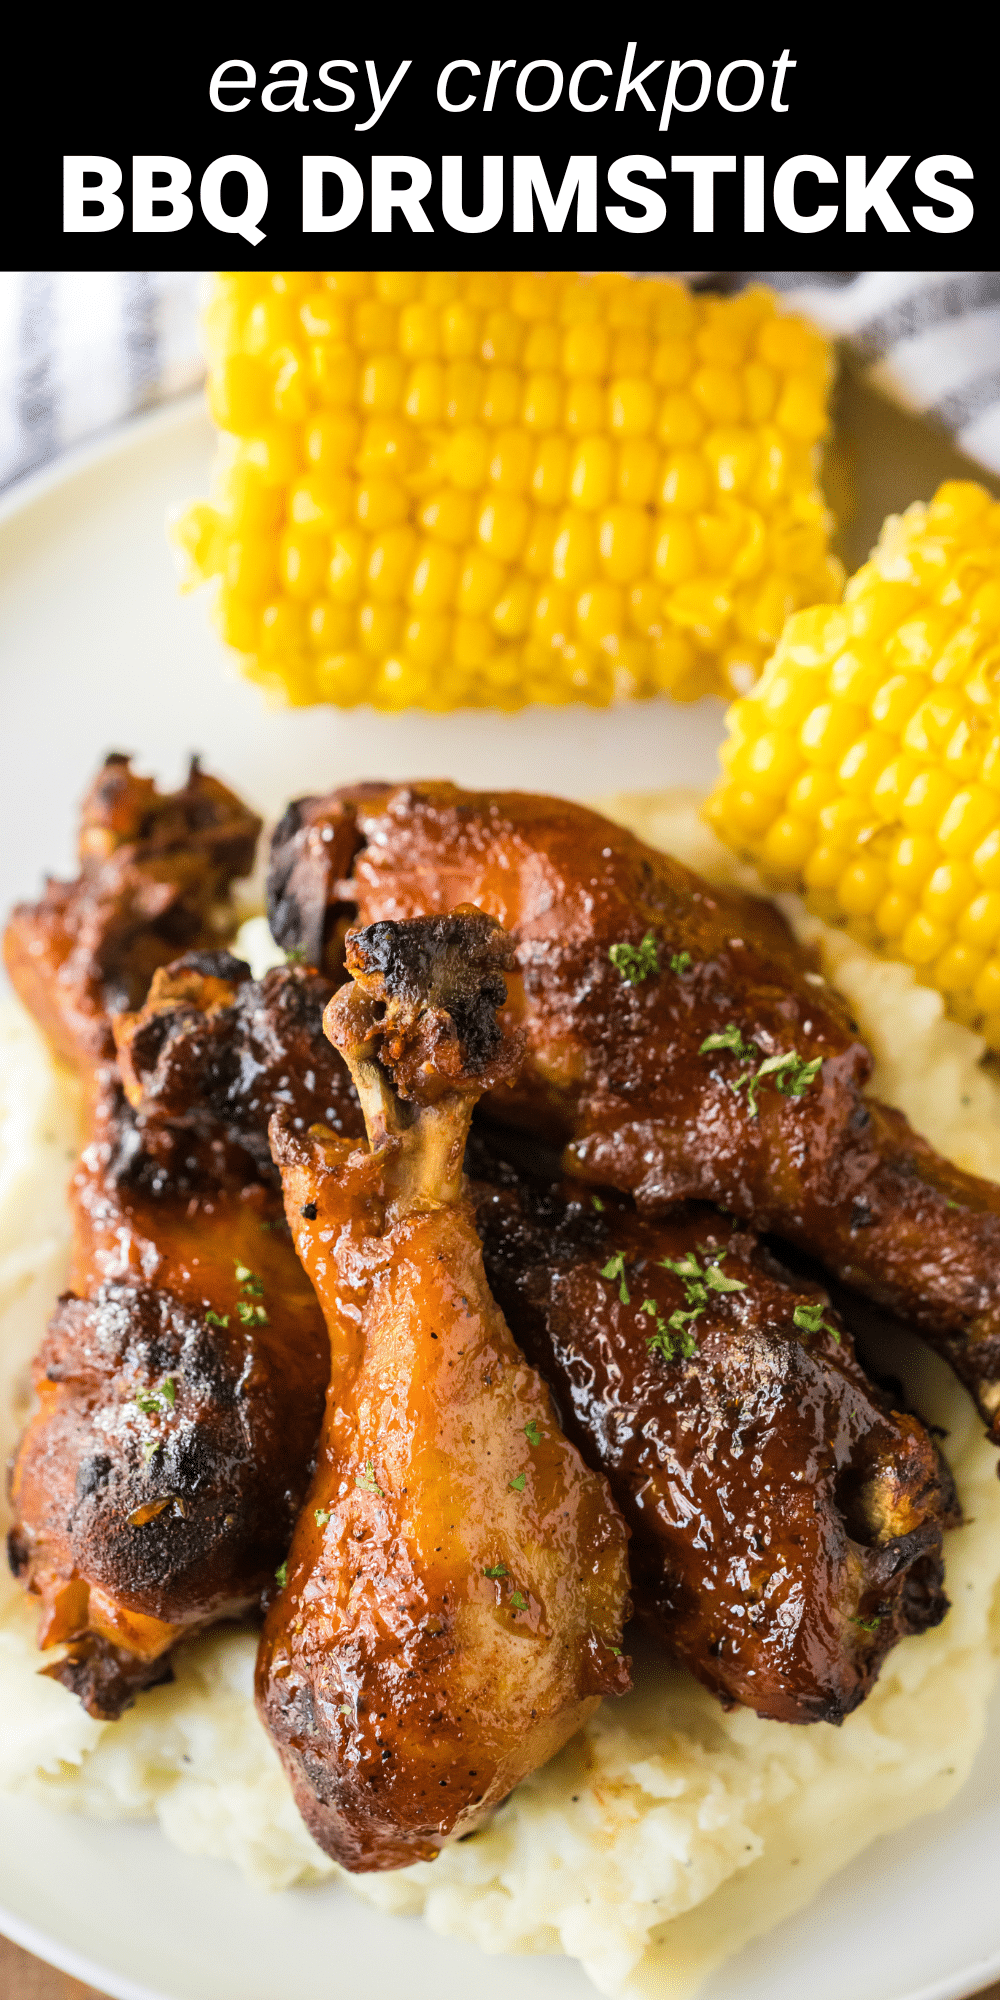 These fall-off-the-bone Crockpot BBQ Drumsticks will satisfy all your cravings for something sweet, tangy, and savory all in one bite! And the best part is that they're incredibly easy to make using just a handful of simple ingredients.